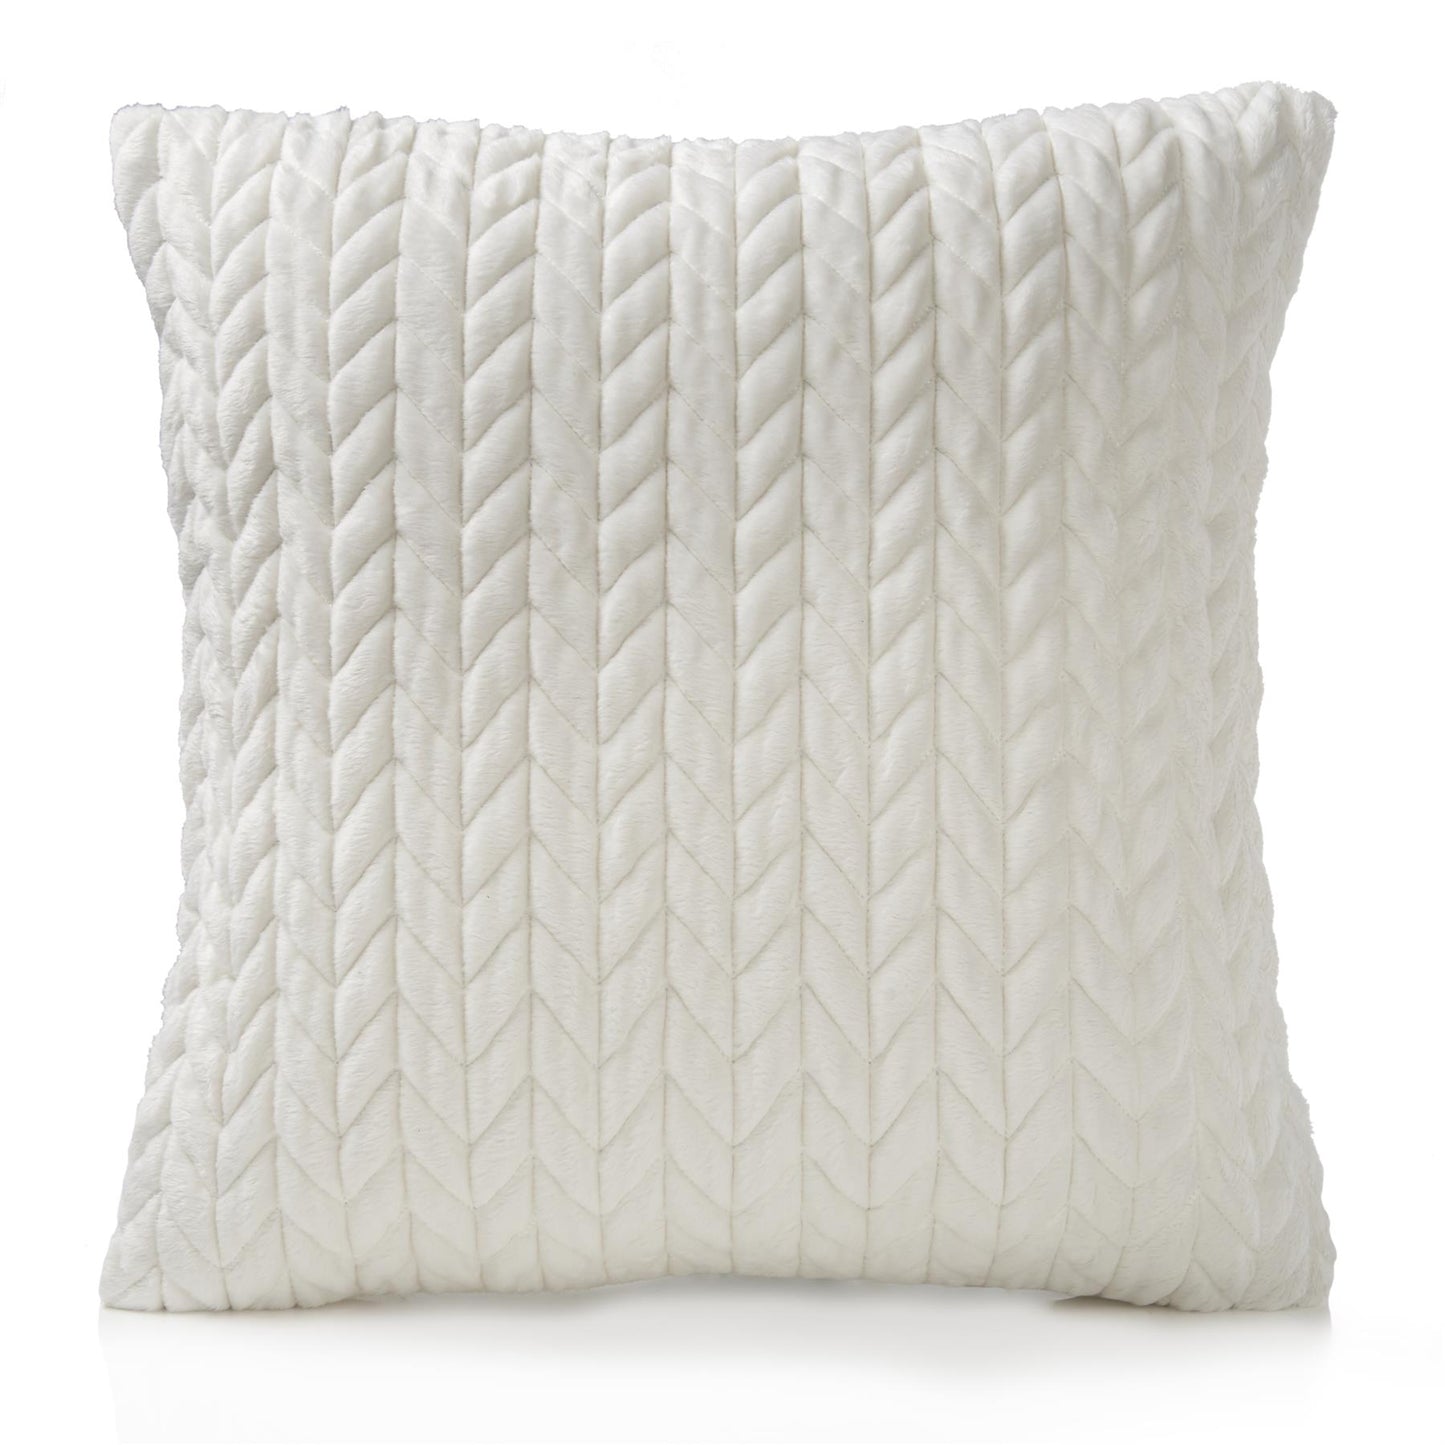 White Supersoft Knitted Velvet Cushion Covers